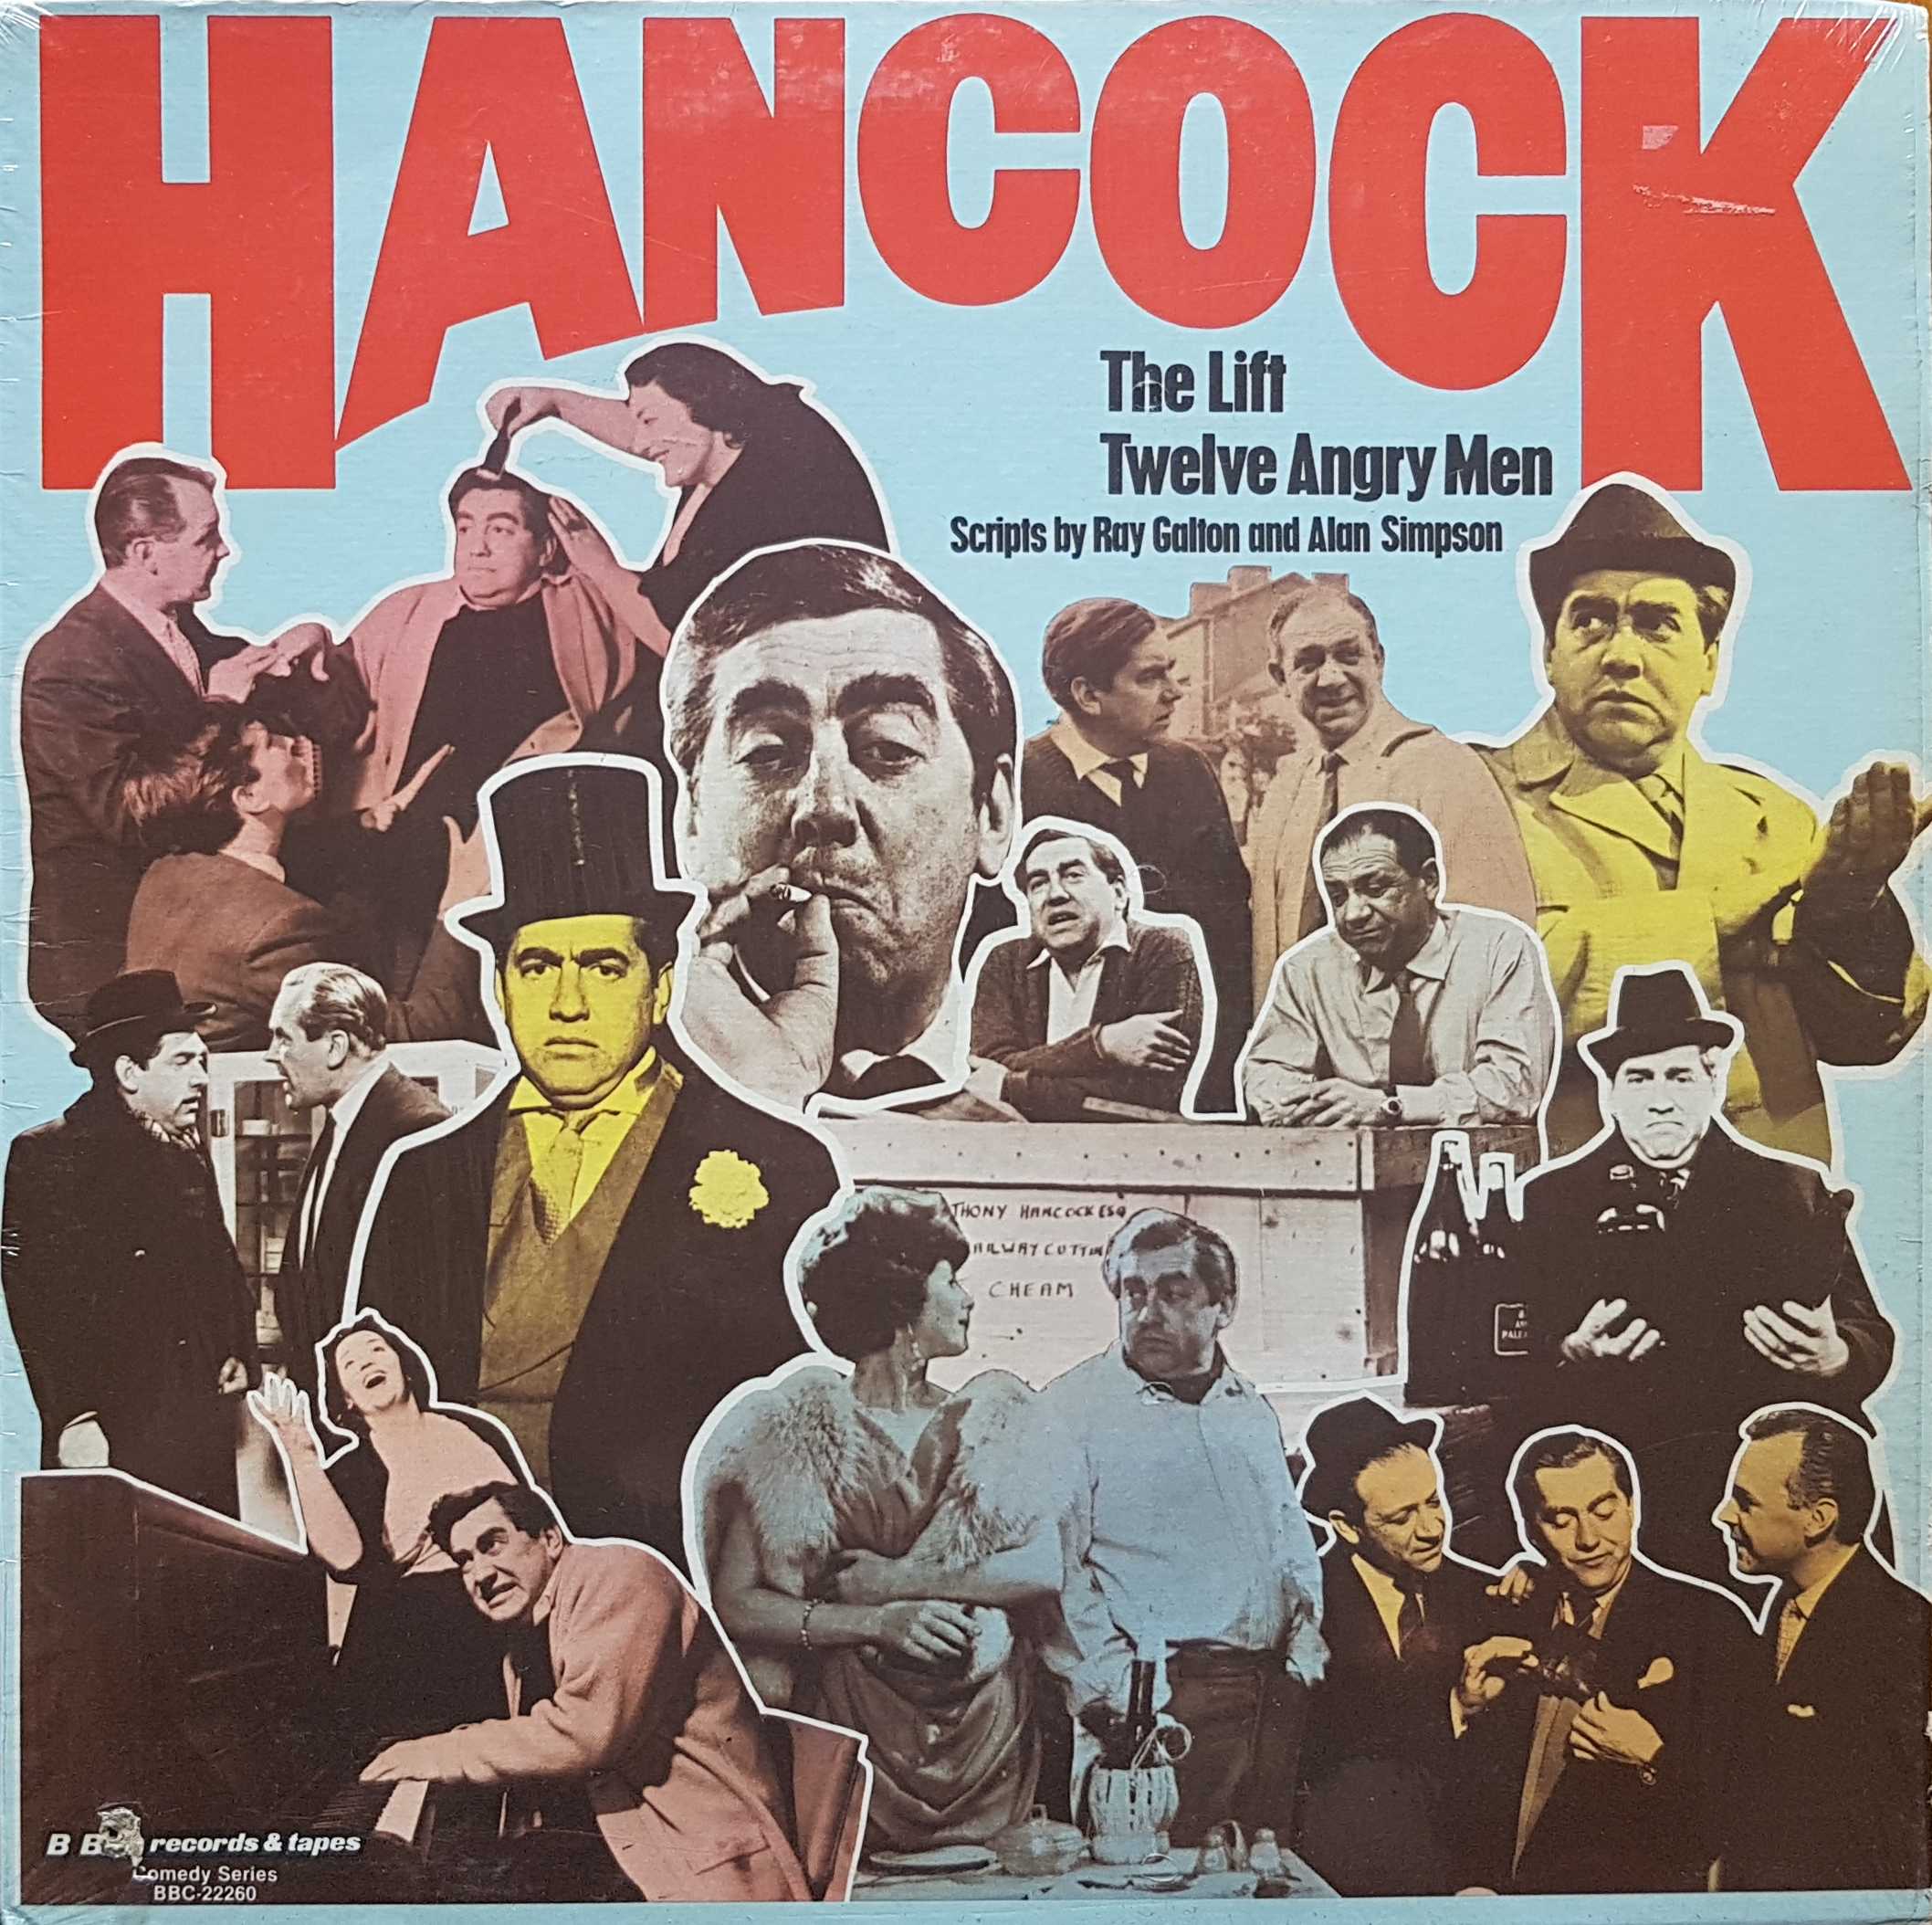 Picture of BBC - 22260 Hancock: The lift / Twelve angry men (US Import) by artist Ray Galton / Alan Simpson from the BBC albums - Records and Tapes library